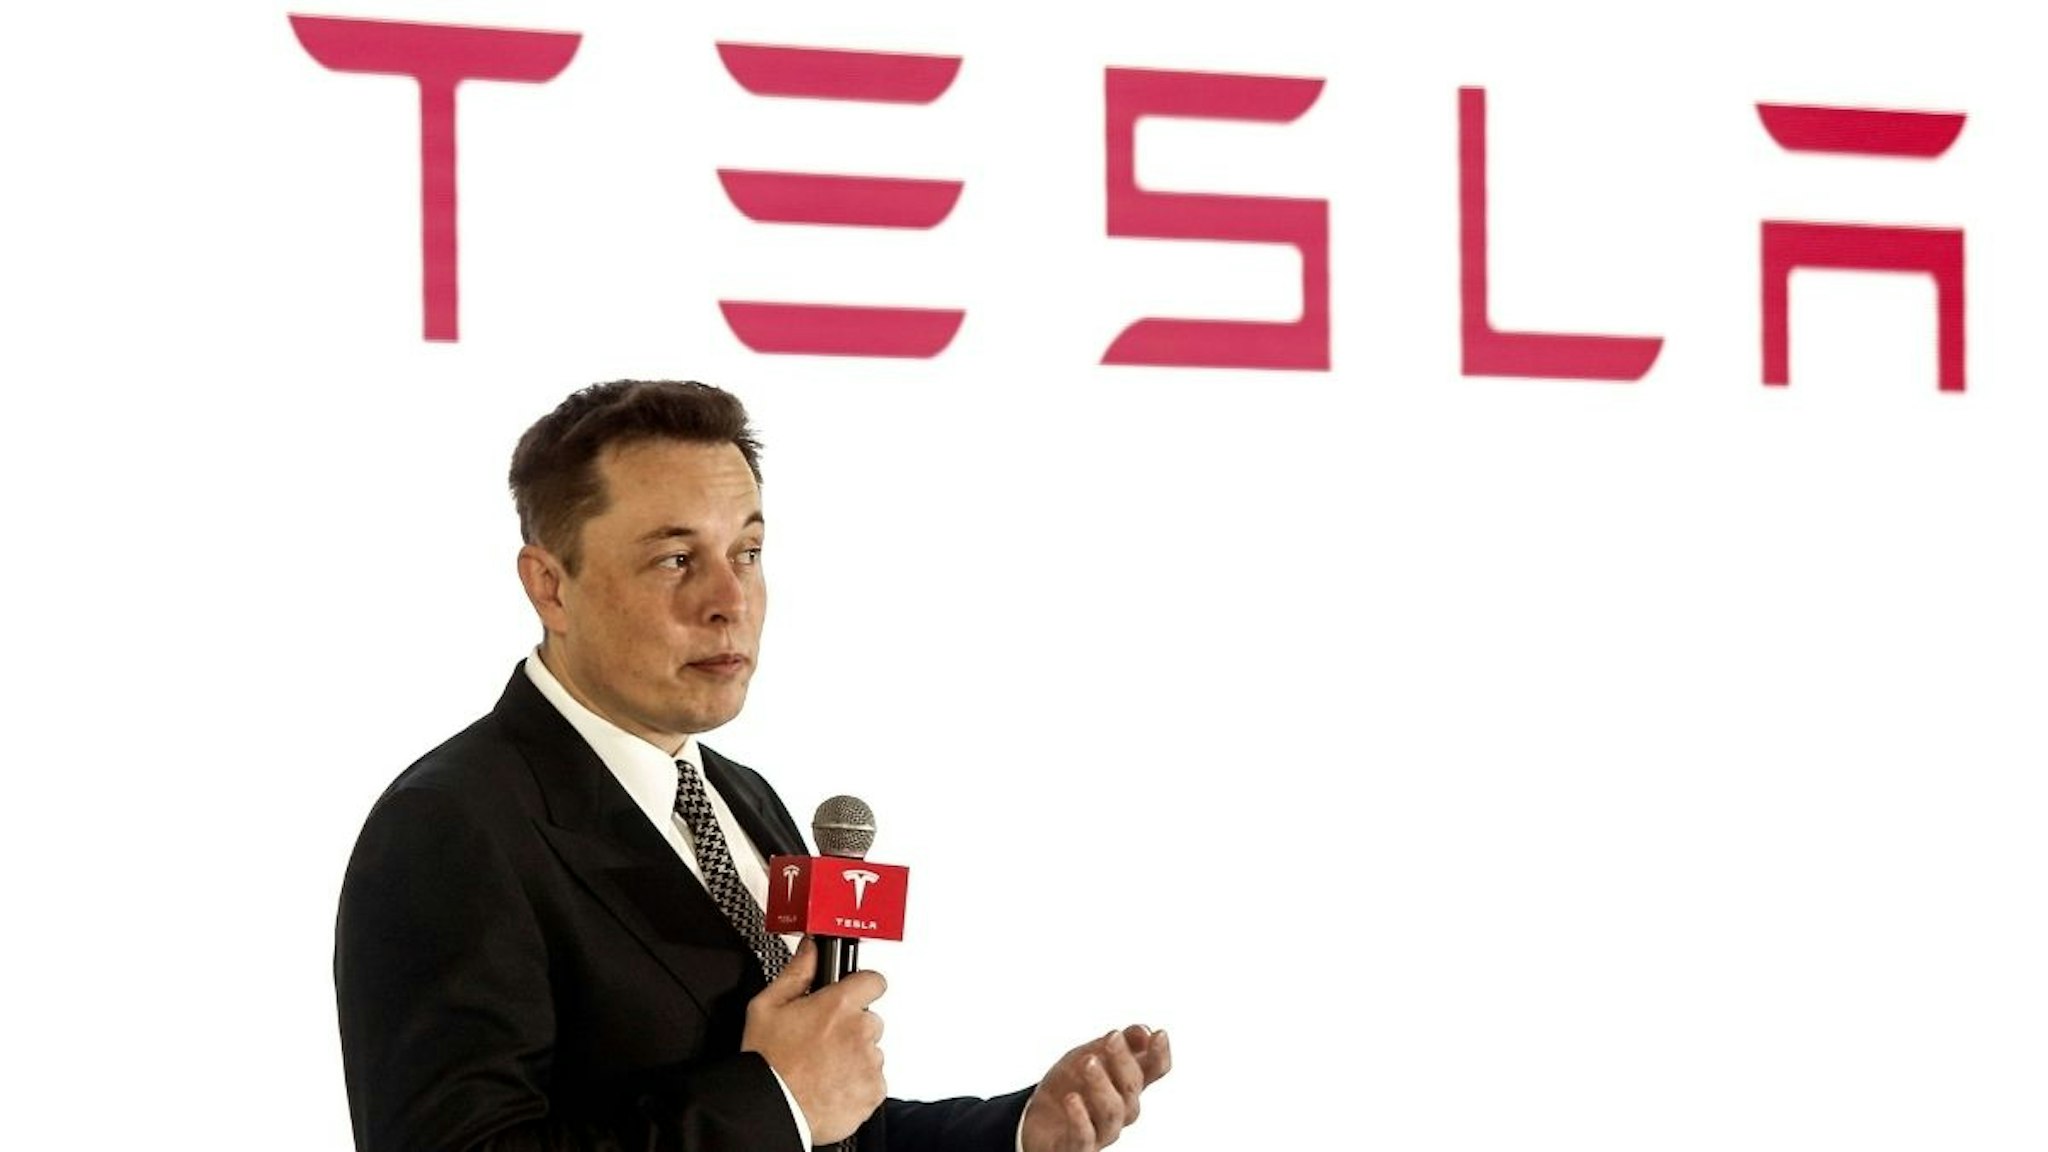 Elon Musk, Chairman, CEO and Product Architect of Tesla Motors, addresses a press conference to declare that the Tesla Motors releases v7.0 System in China on a limited basis for its Model S, which will enable self-driving features such as Autosteer for a select group of beta testers on October 23, 2015 in Beijing, China.